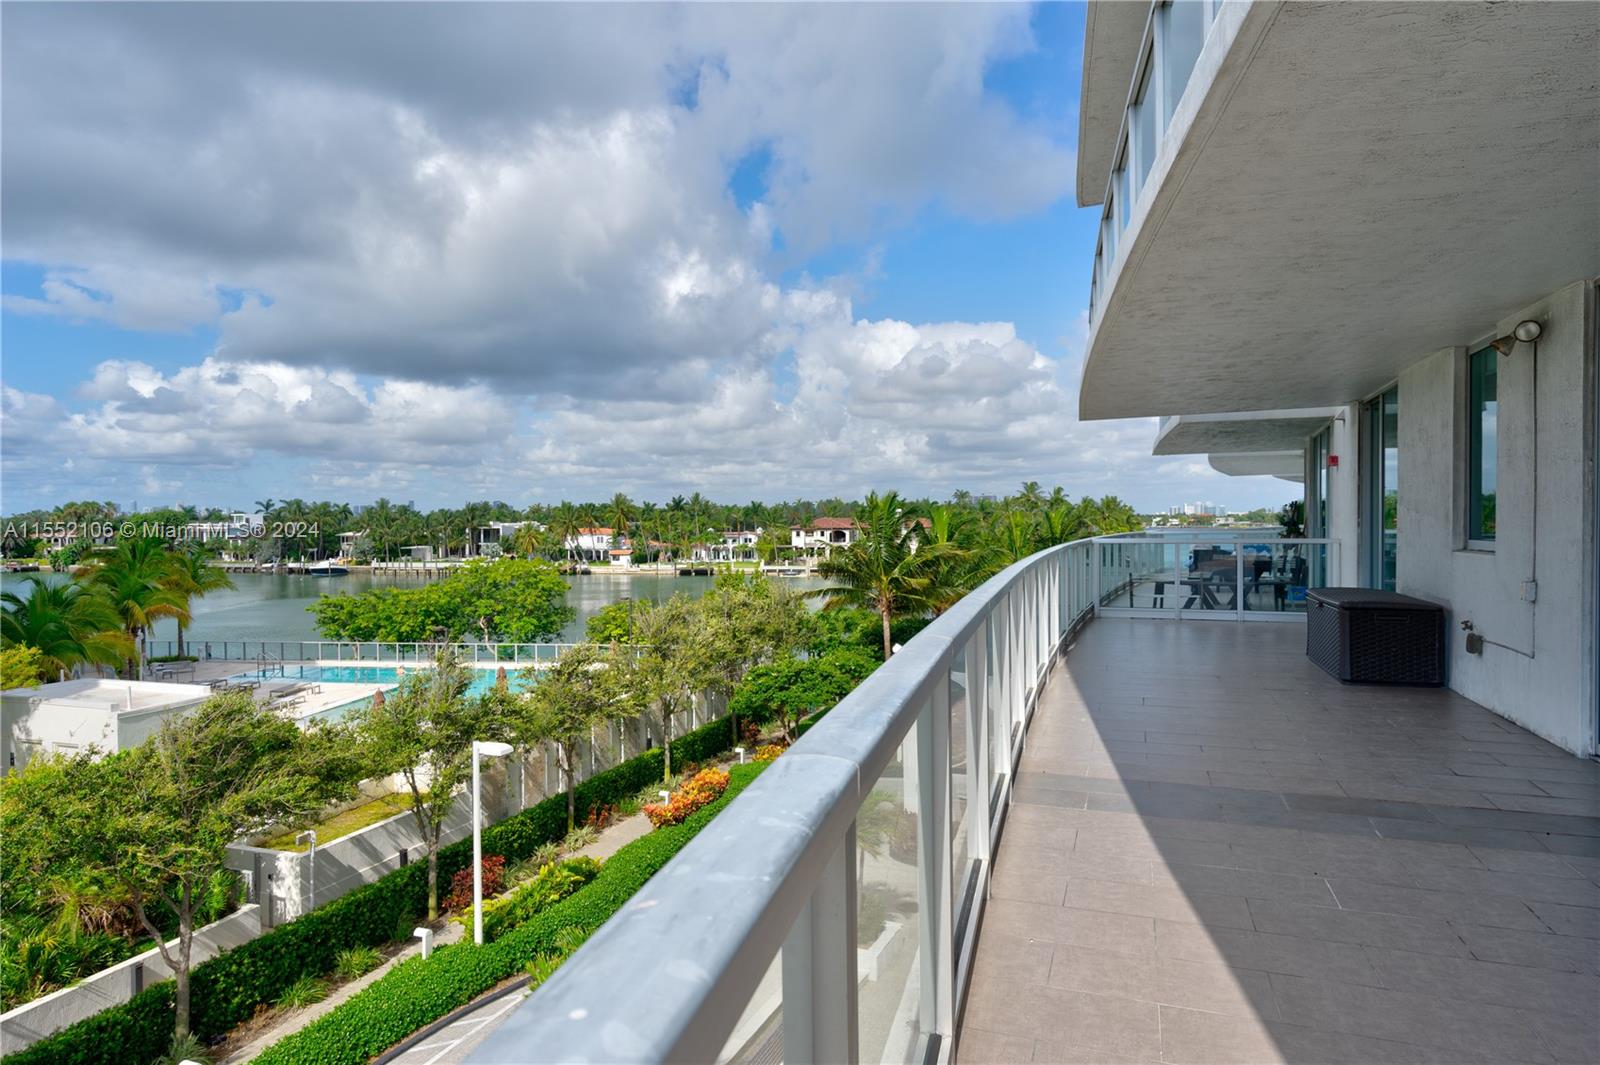 Beautiful 3 Bed/2.5 Bath at luxurious and boutique building Eden House in Miami Beach! Bright and Spacious with Open Water Views. Huge private patio area. Elegant Lobby, State-of-the-Art fitness center with Bay View, Resort Pool, Spa & Garden, On-site Concierge, 24h valet /security. Amazing location, with a short walk to the beach, shops and restaurants. Furnished.